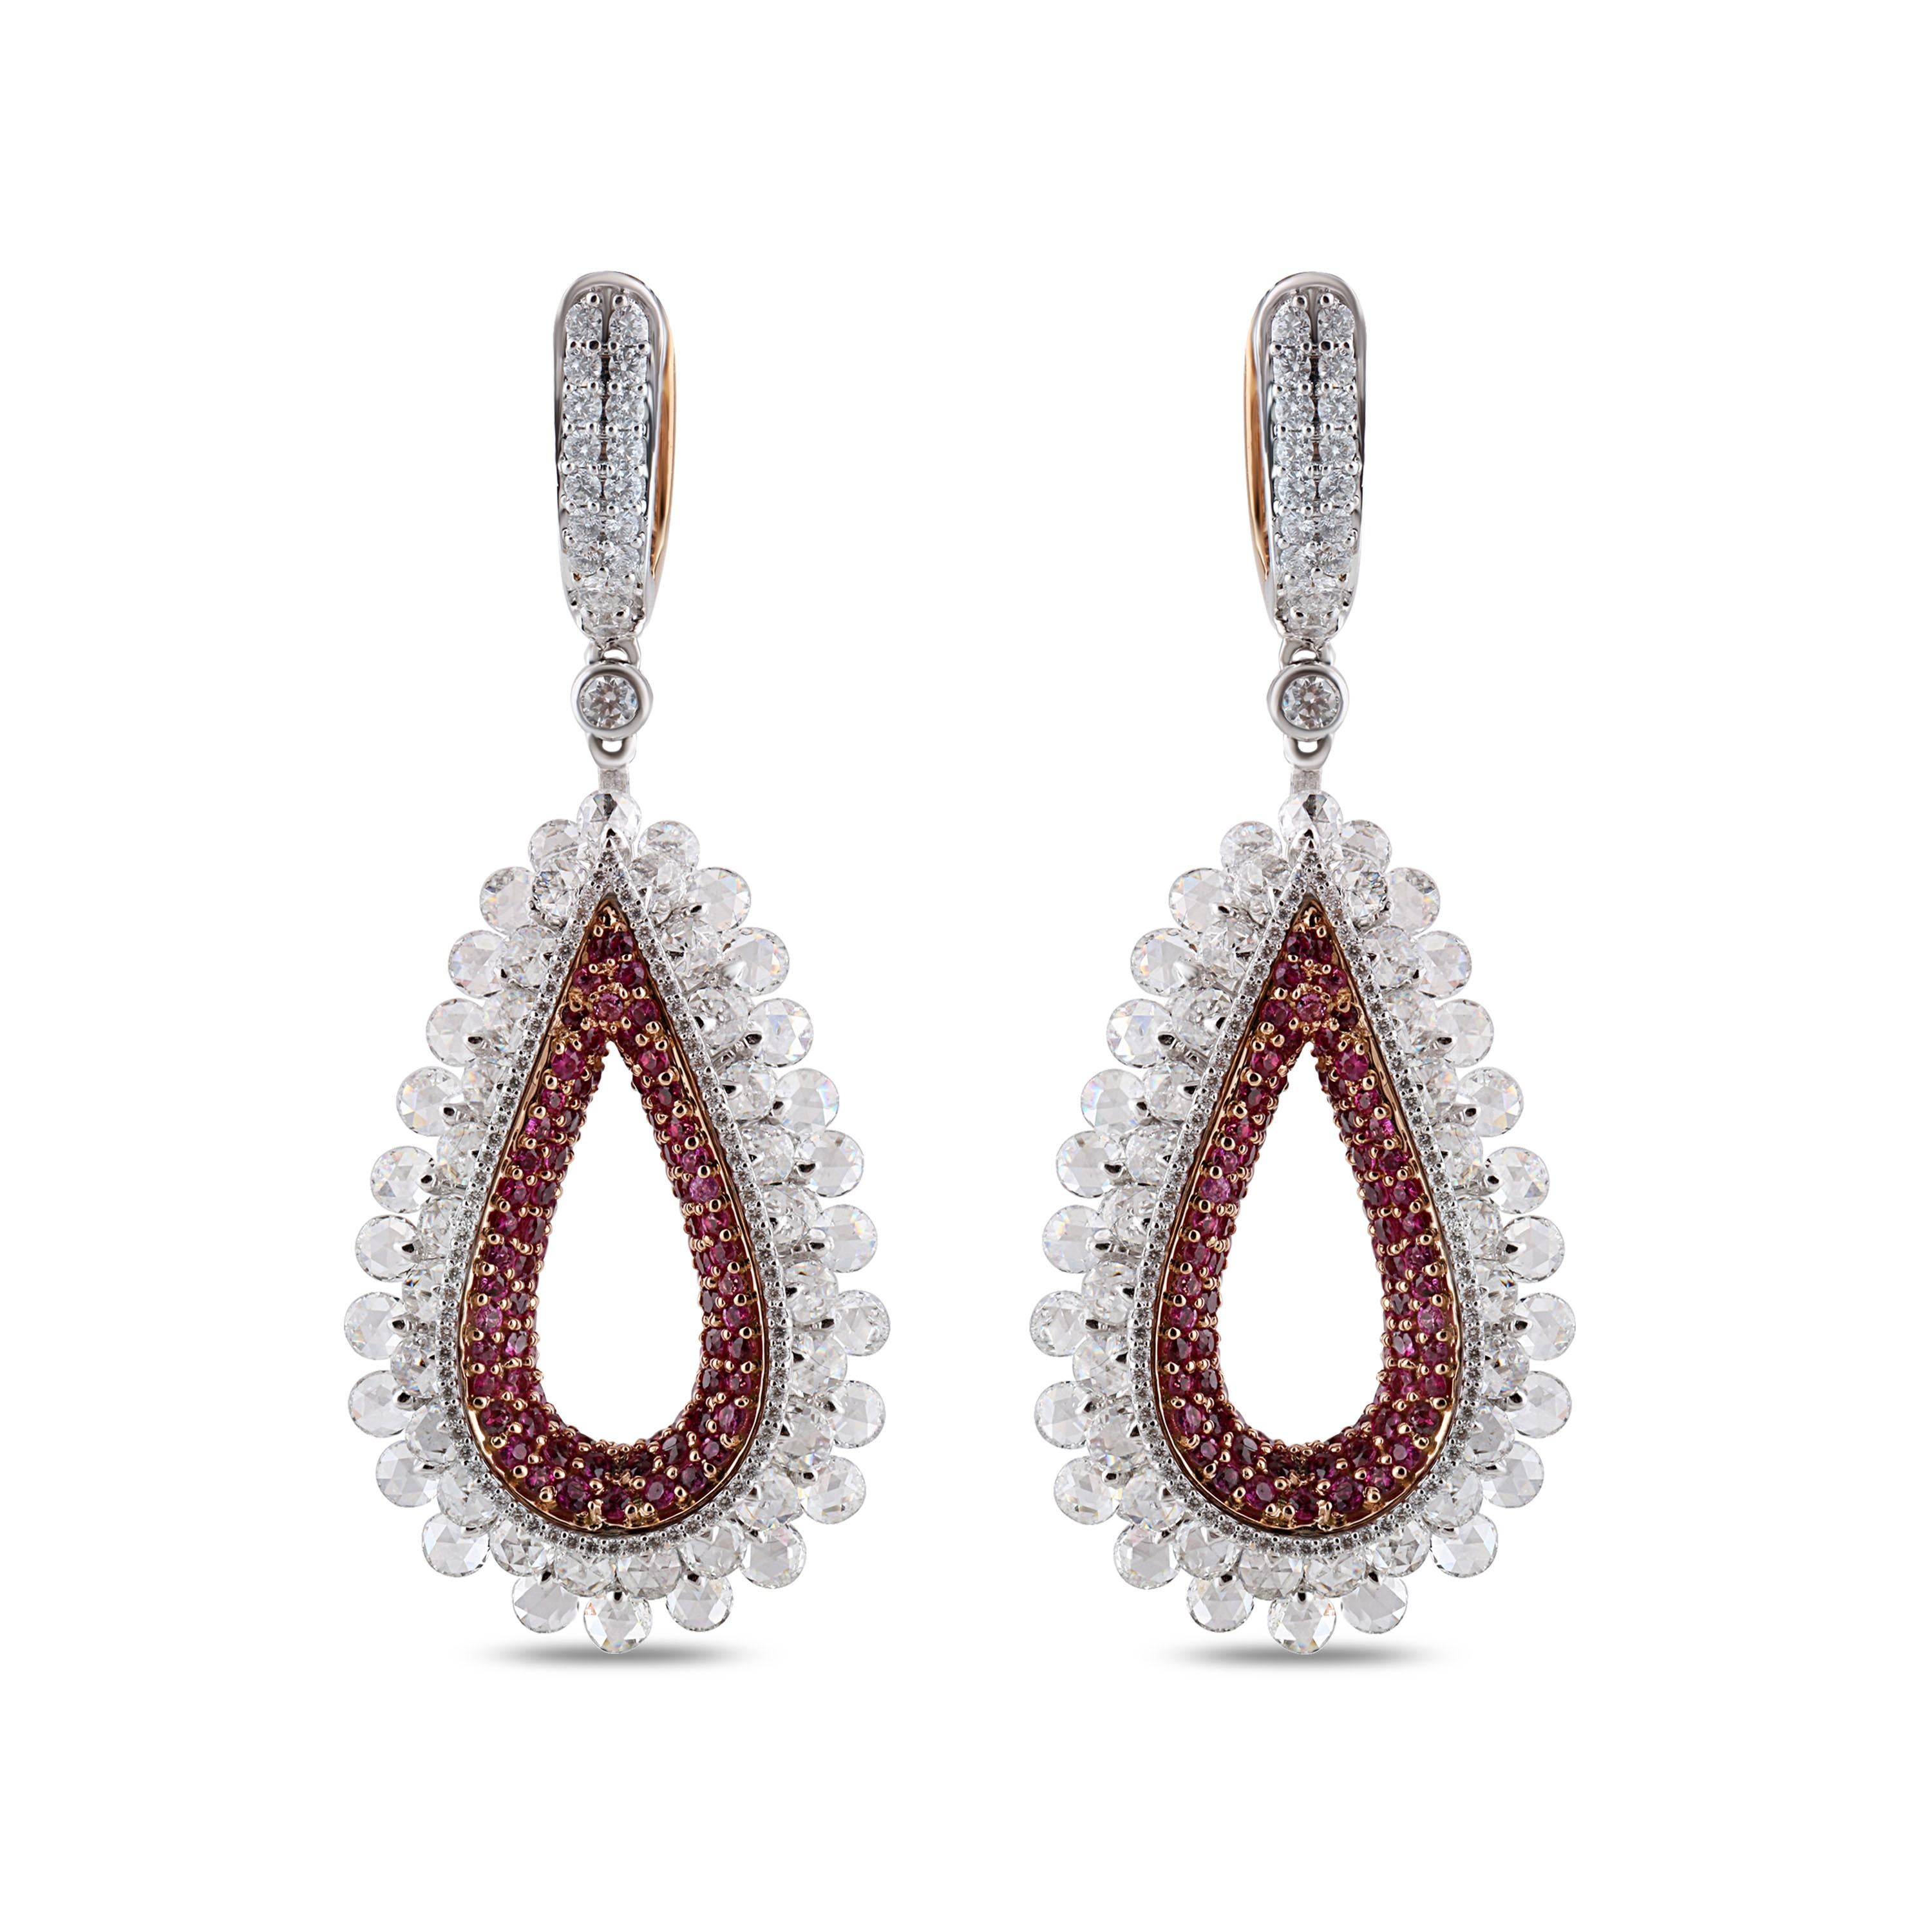 This teardrop-shaped pair of 18K white gold and rose gold earrings featuring brilliant cut and rose cut diamonds will become a treasured part of your jewelry collection almost instantly. Adding charm to this style is a row of superior pink